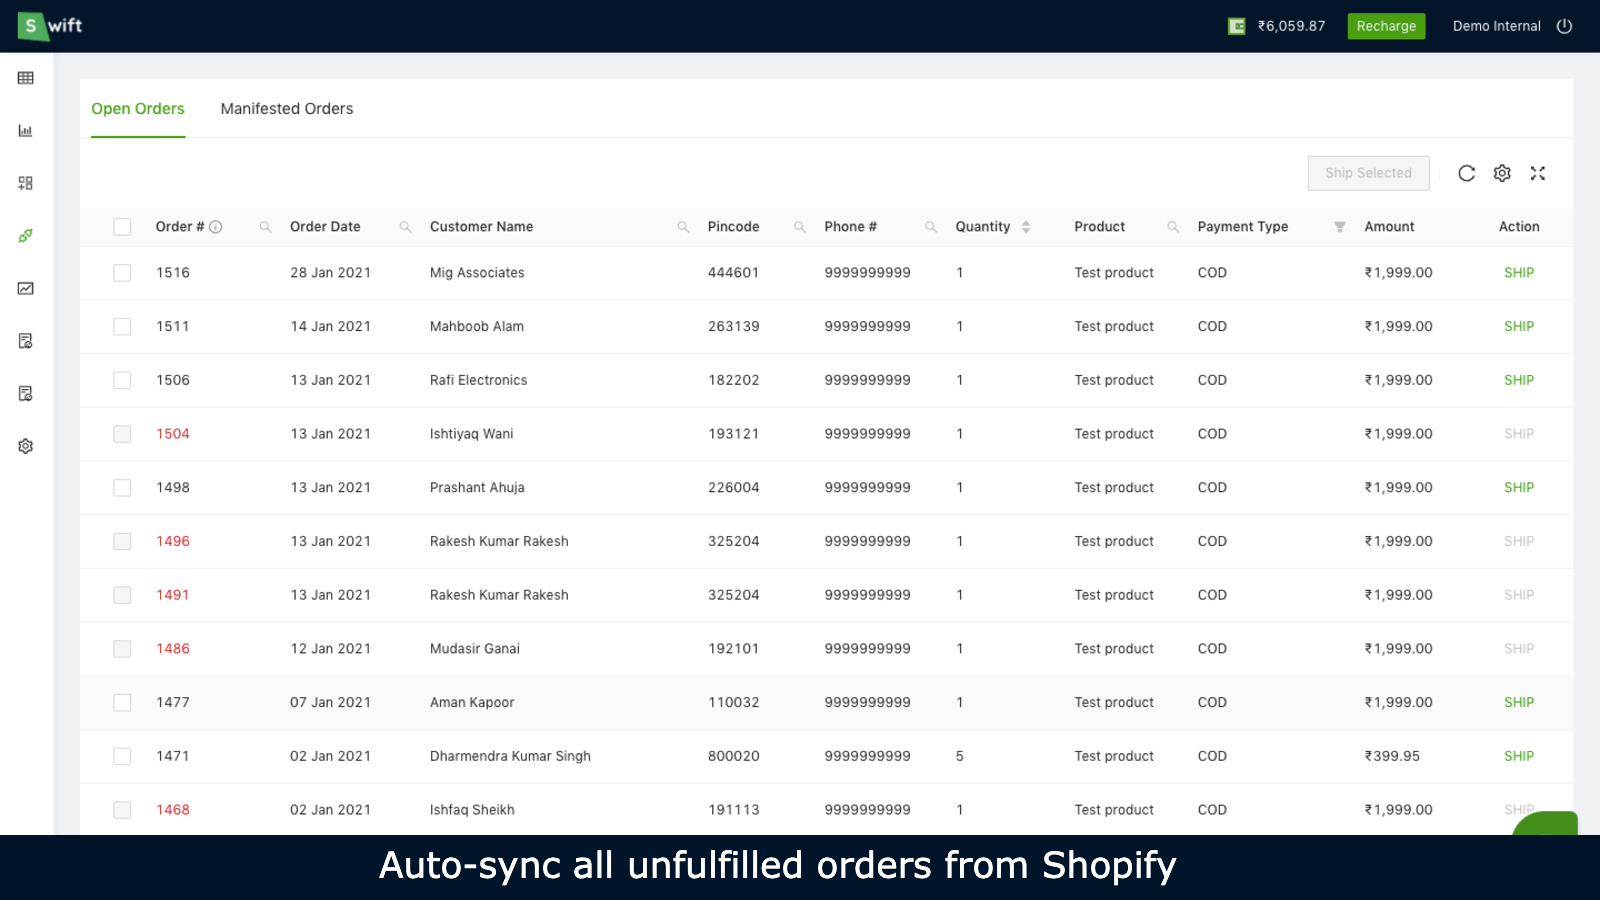 Auto-sync all orders from Shopify